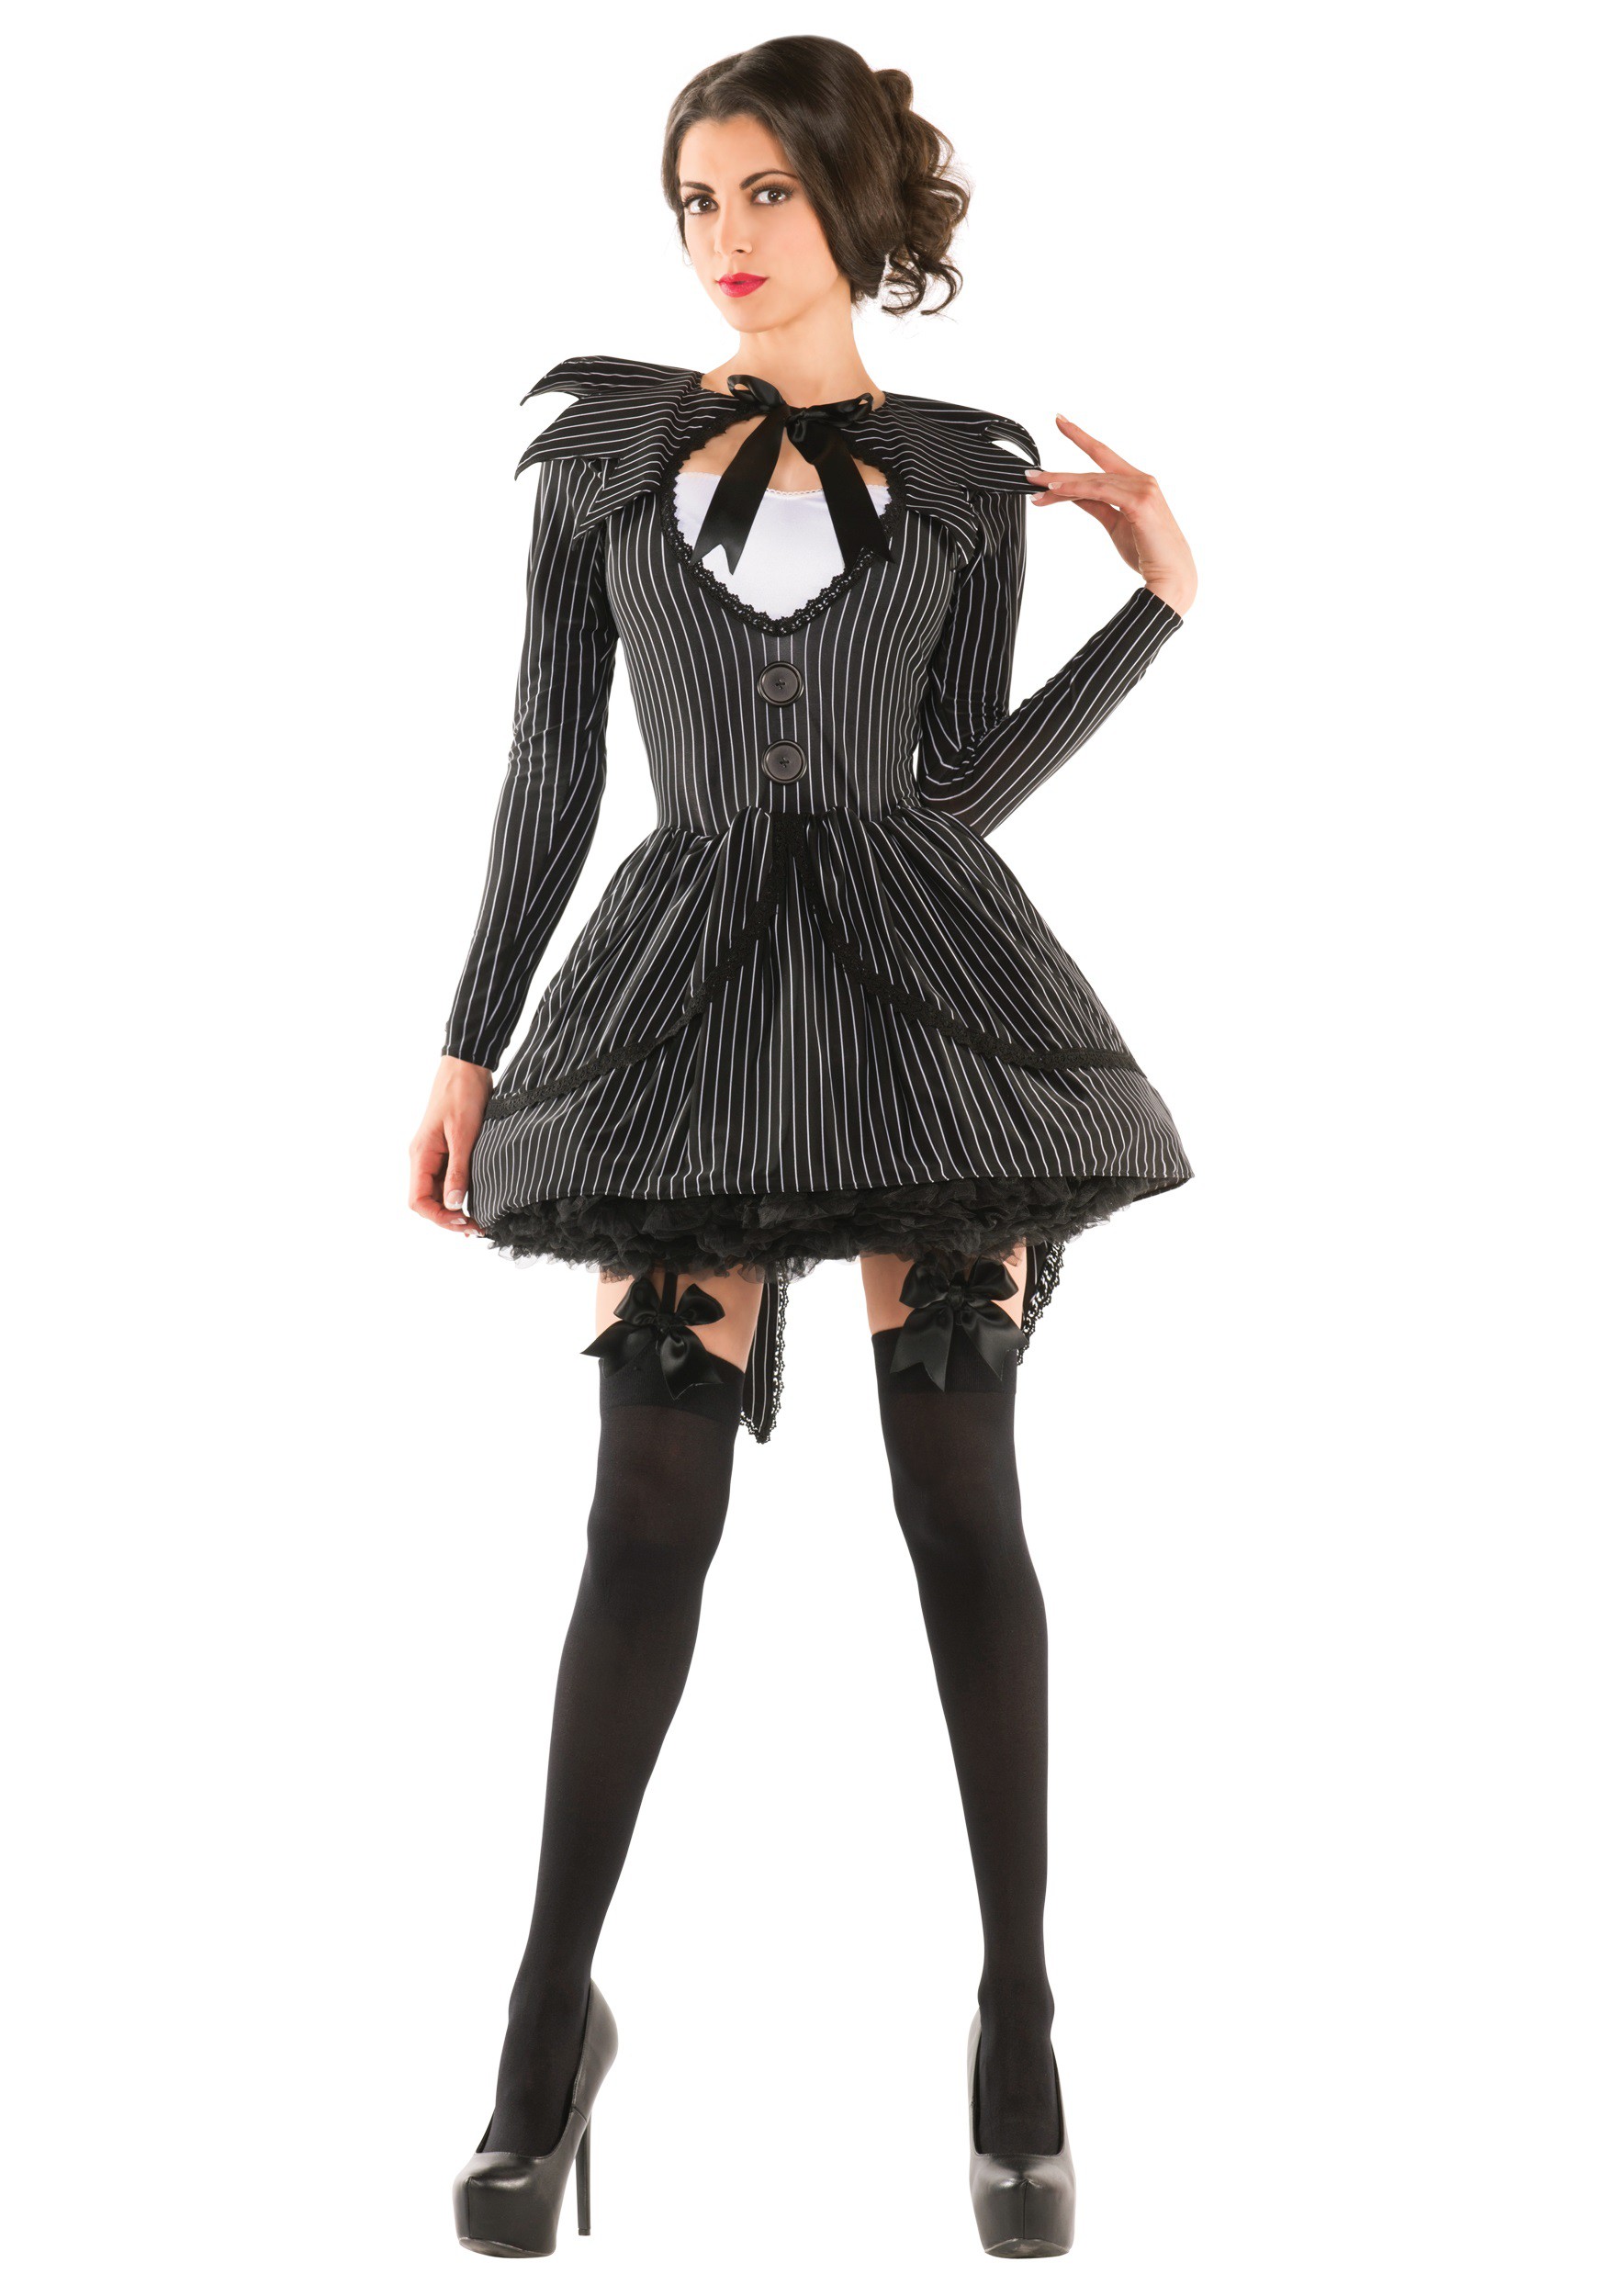 Image of Bad Dreams Babe Adult Costume ID PKPK407-XL